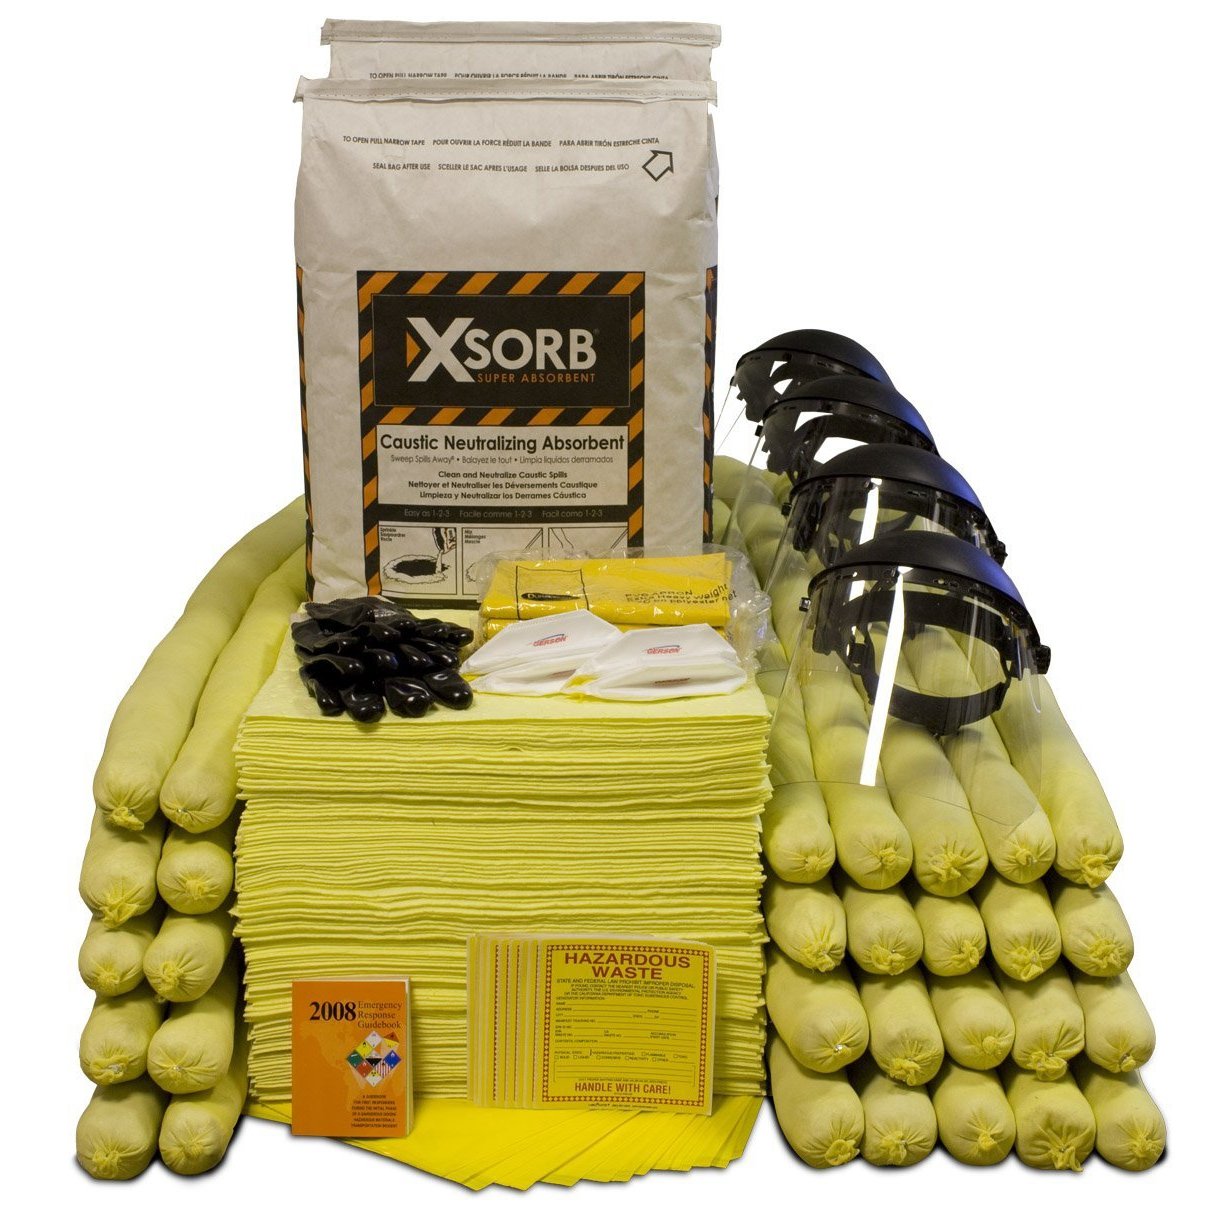 XSORB Caustic Neutralizing 95 gal Spill Response Kit - 1 OVERPACK-eSafety Supplies, Inc